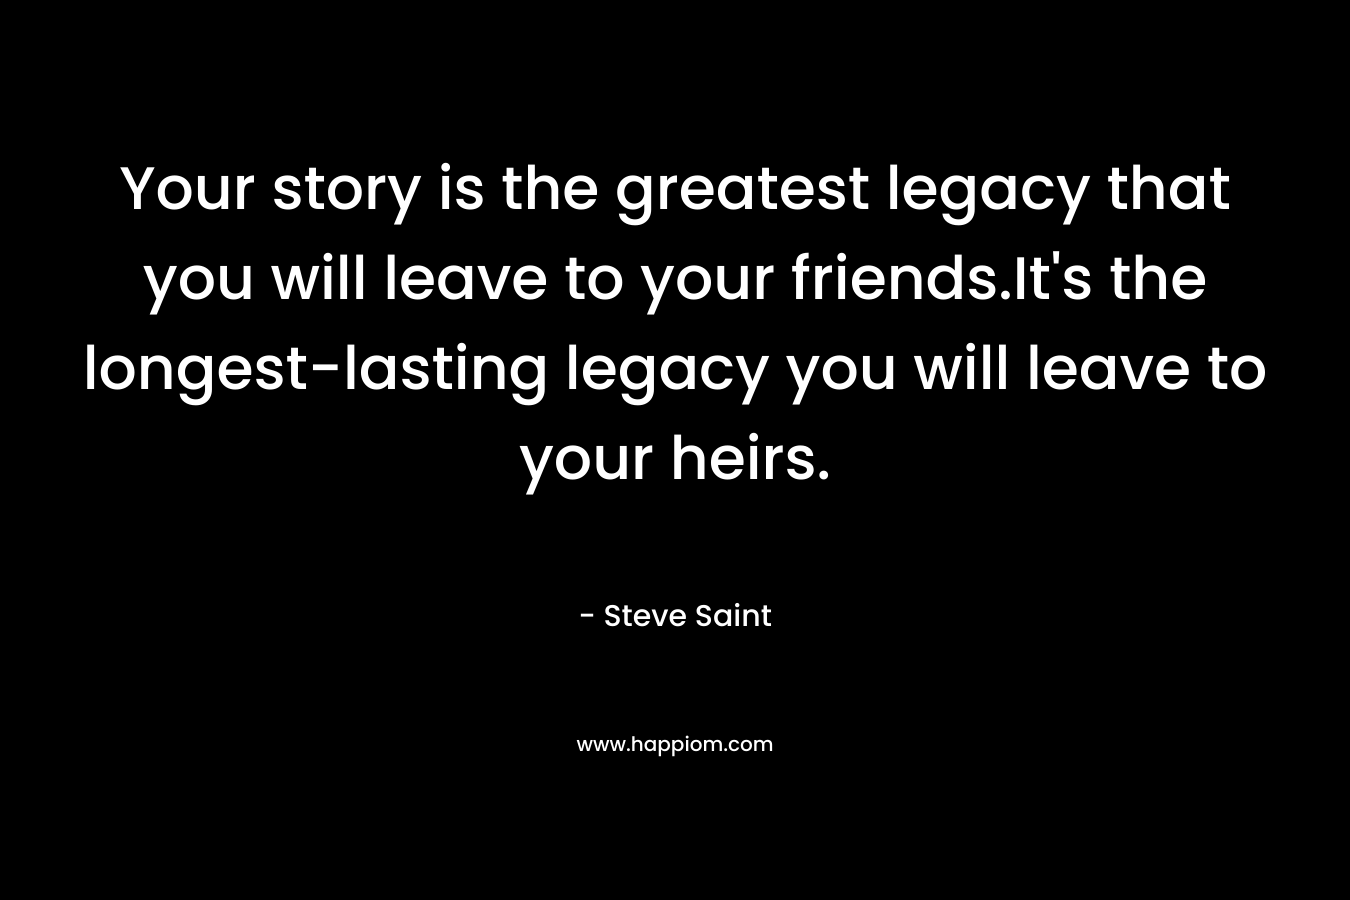 Your story is the greatest legacy that you will leave to your friends.It’s the longest-lasting legacy you will leave to your heirs. – Steve Saint